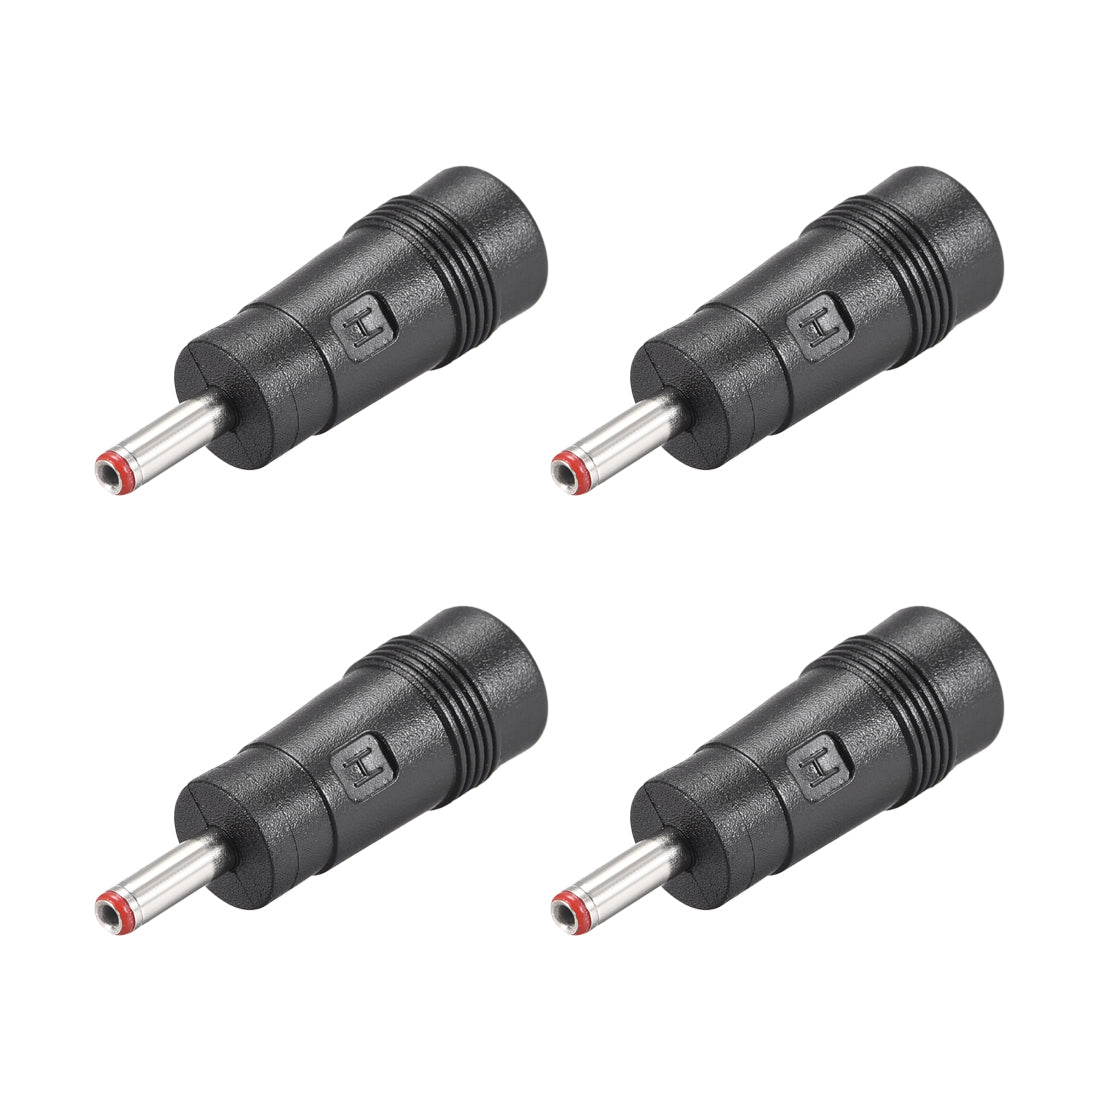 uxcell Uxcell 4pcs DC Power Converter 3.5mm x 1.35mm Male to 5.5mm x 2.5mm Female Adapter Connector